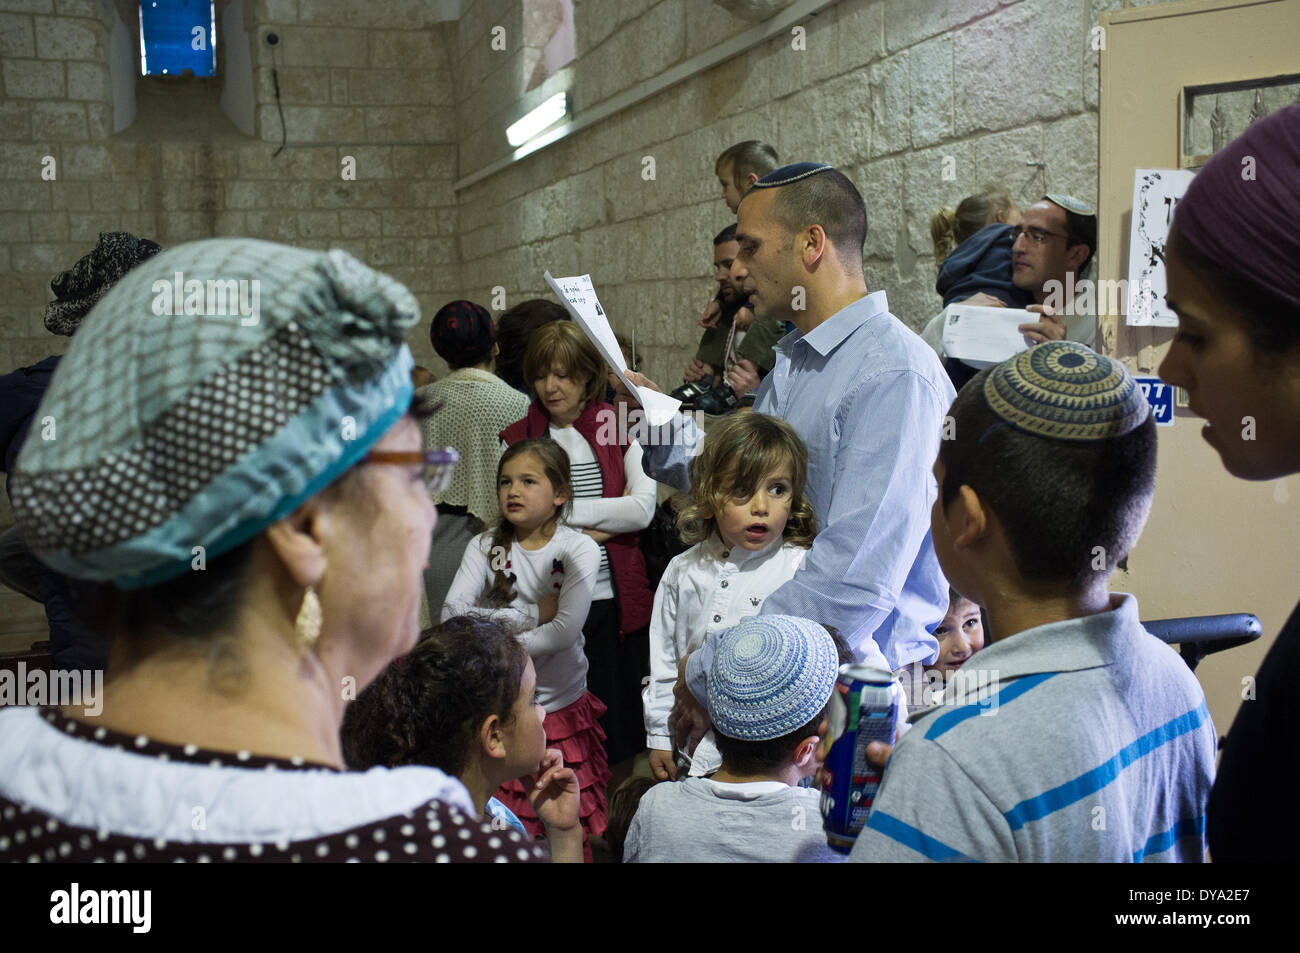 A family performs a Halaqah (Sephardic Jews) or Upsherin (Ashkenazi Jews) ceremony at the tomb of the Prophet Samuel, cutting their three-year-old son's hair for the first time. This is the traditional burial site of the biblical Prophet Samuel, just north of Jerusalem. The tomb is located in an underground chamber inside a small synagogue in the 18th century Nabi Samwil Mosque, built on the remains of a Crusader-era fortress. Stock Photo